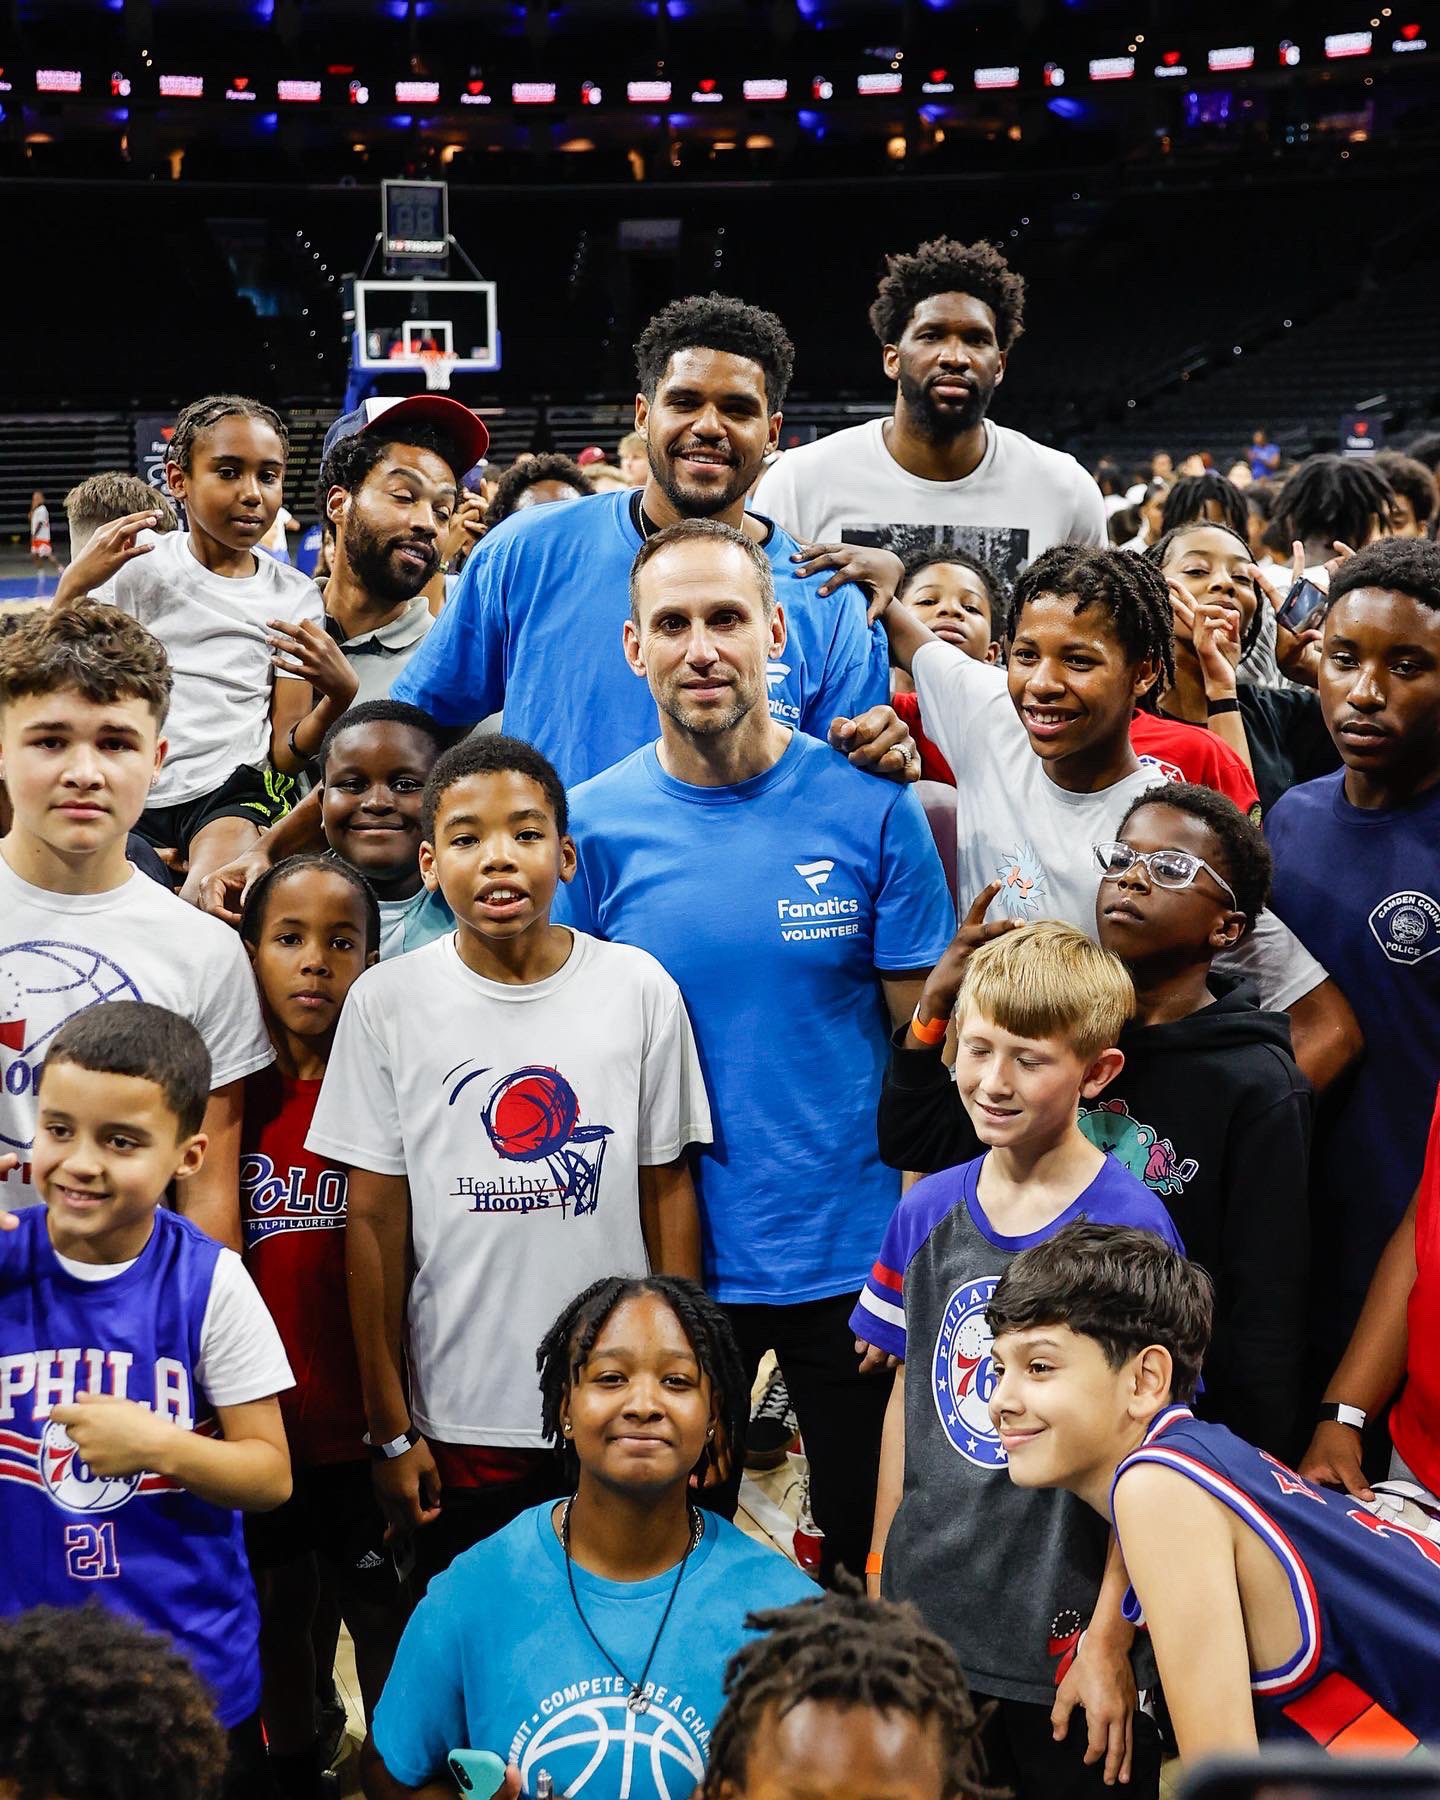 Fanatics CEO Michael Rubin brings star-studded Merch Madness giveaway to  underserved kids across US